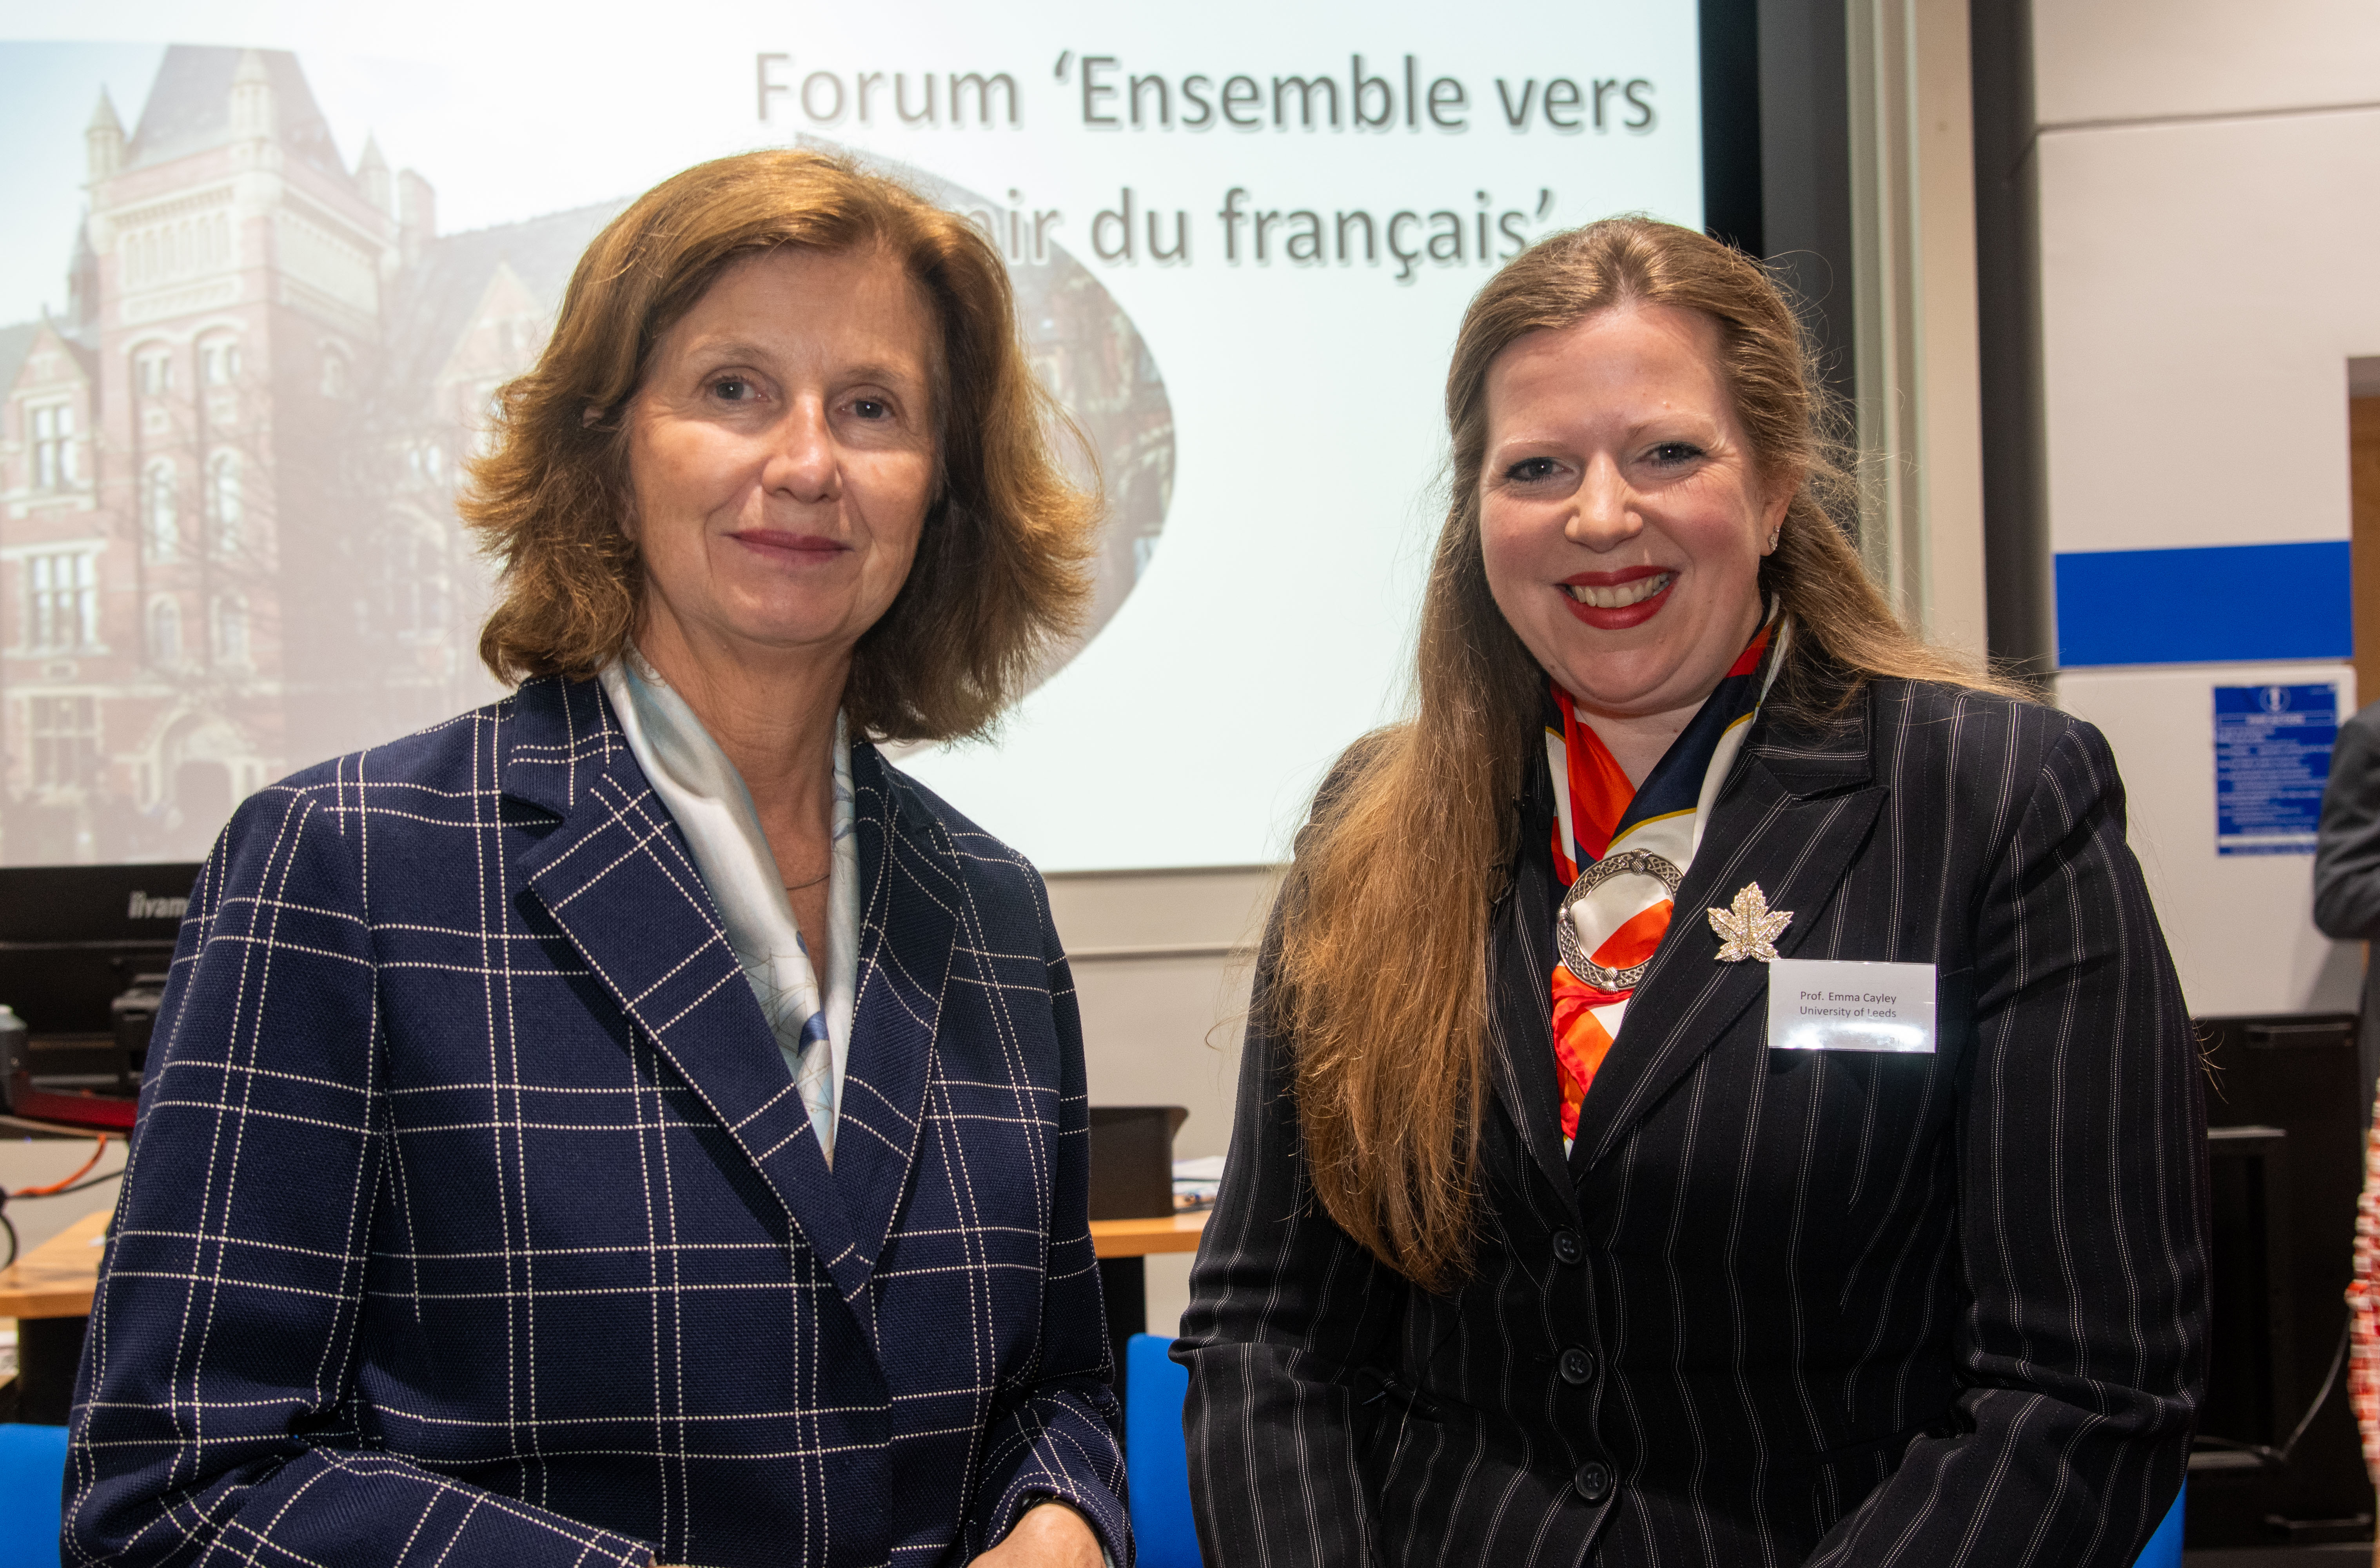 Hélène Duchêne, French Ambassador and Emma Cayley, Head of Languages, Cultures and Societies